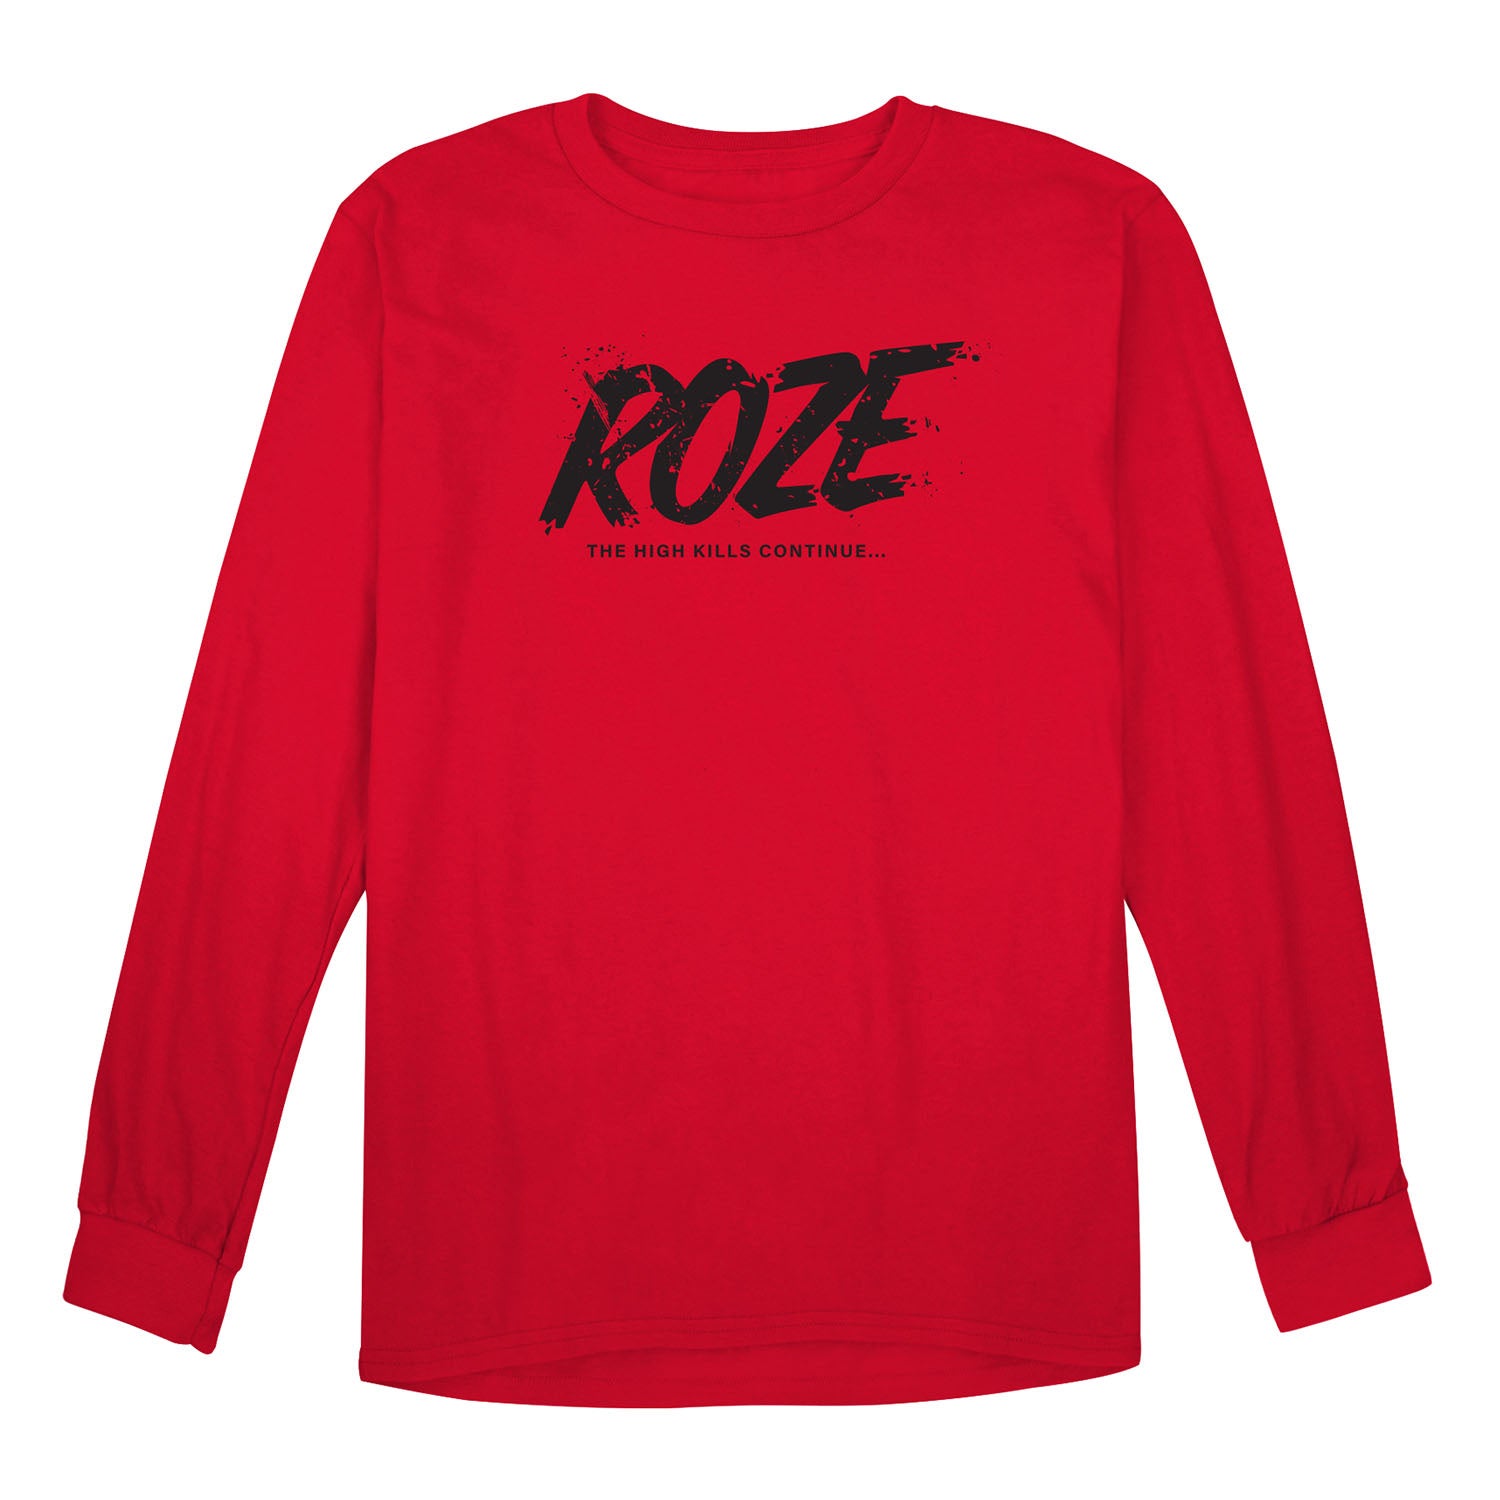 Call of Duty Red Roze Long Sleeve T-Shirt - Front View